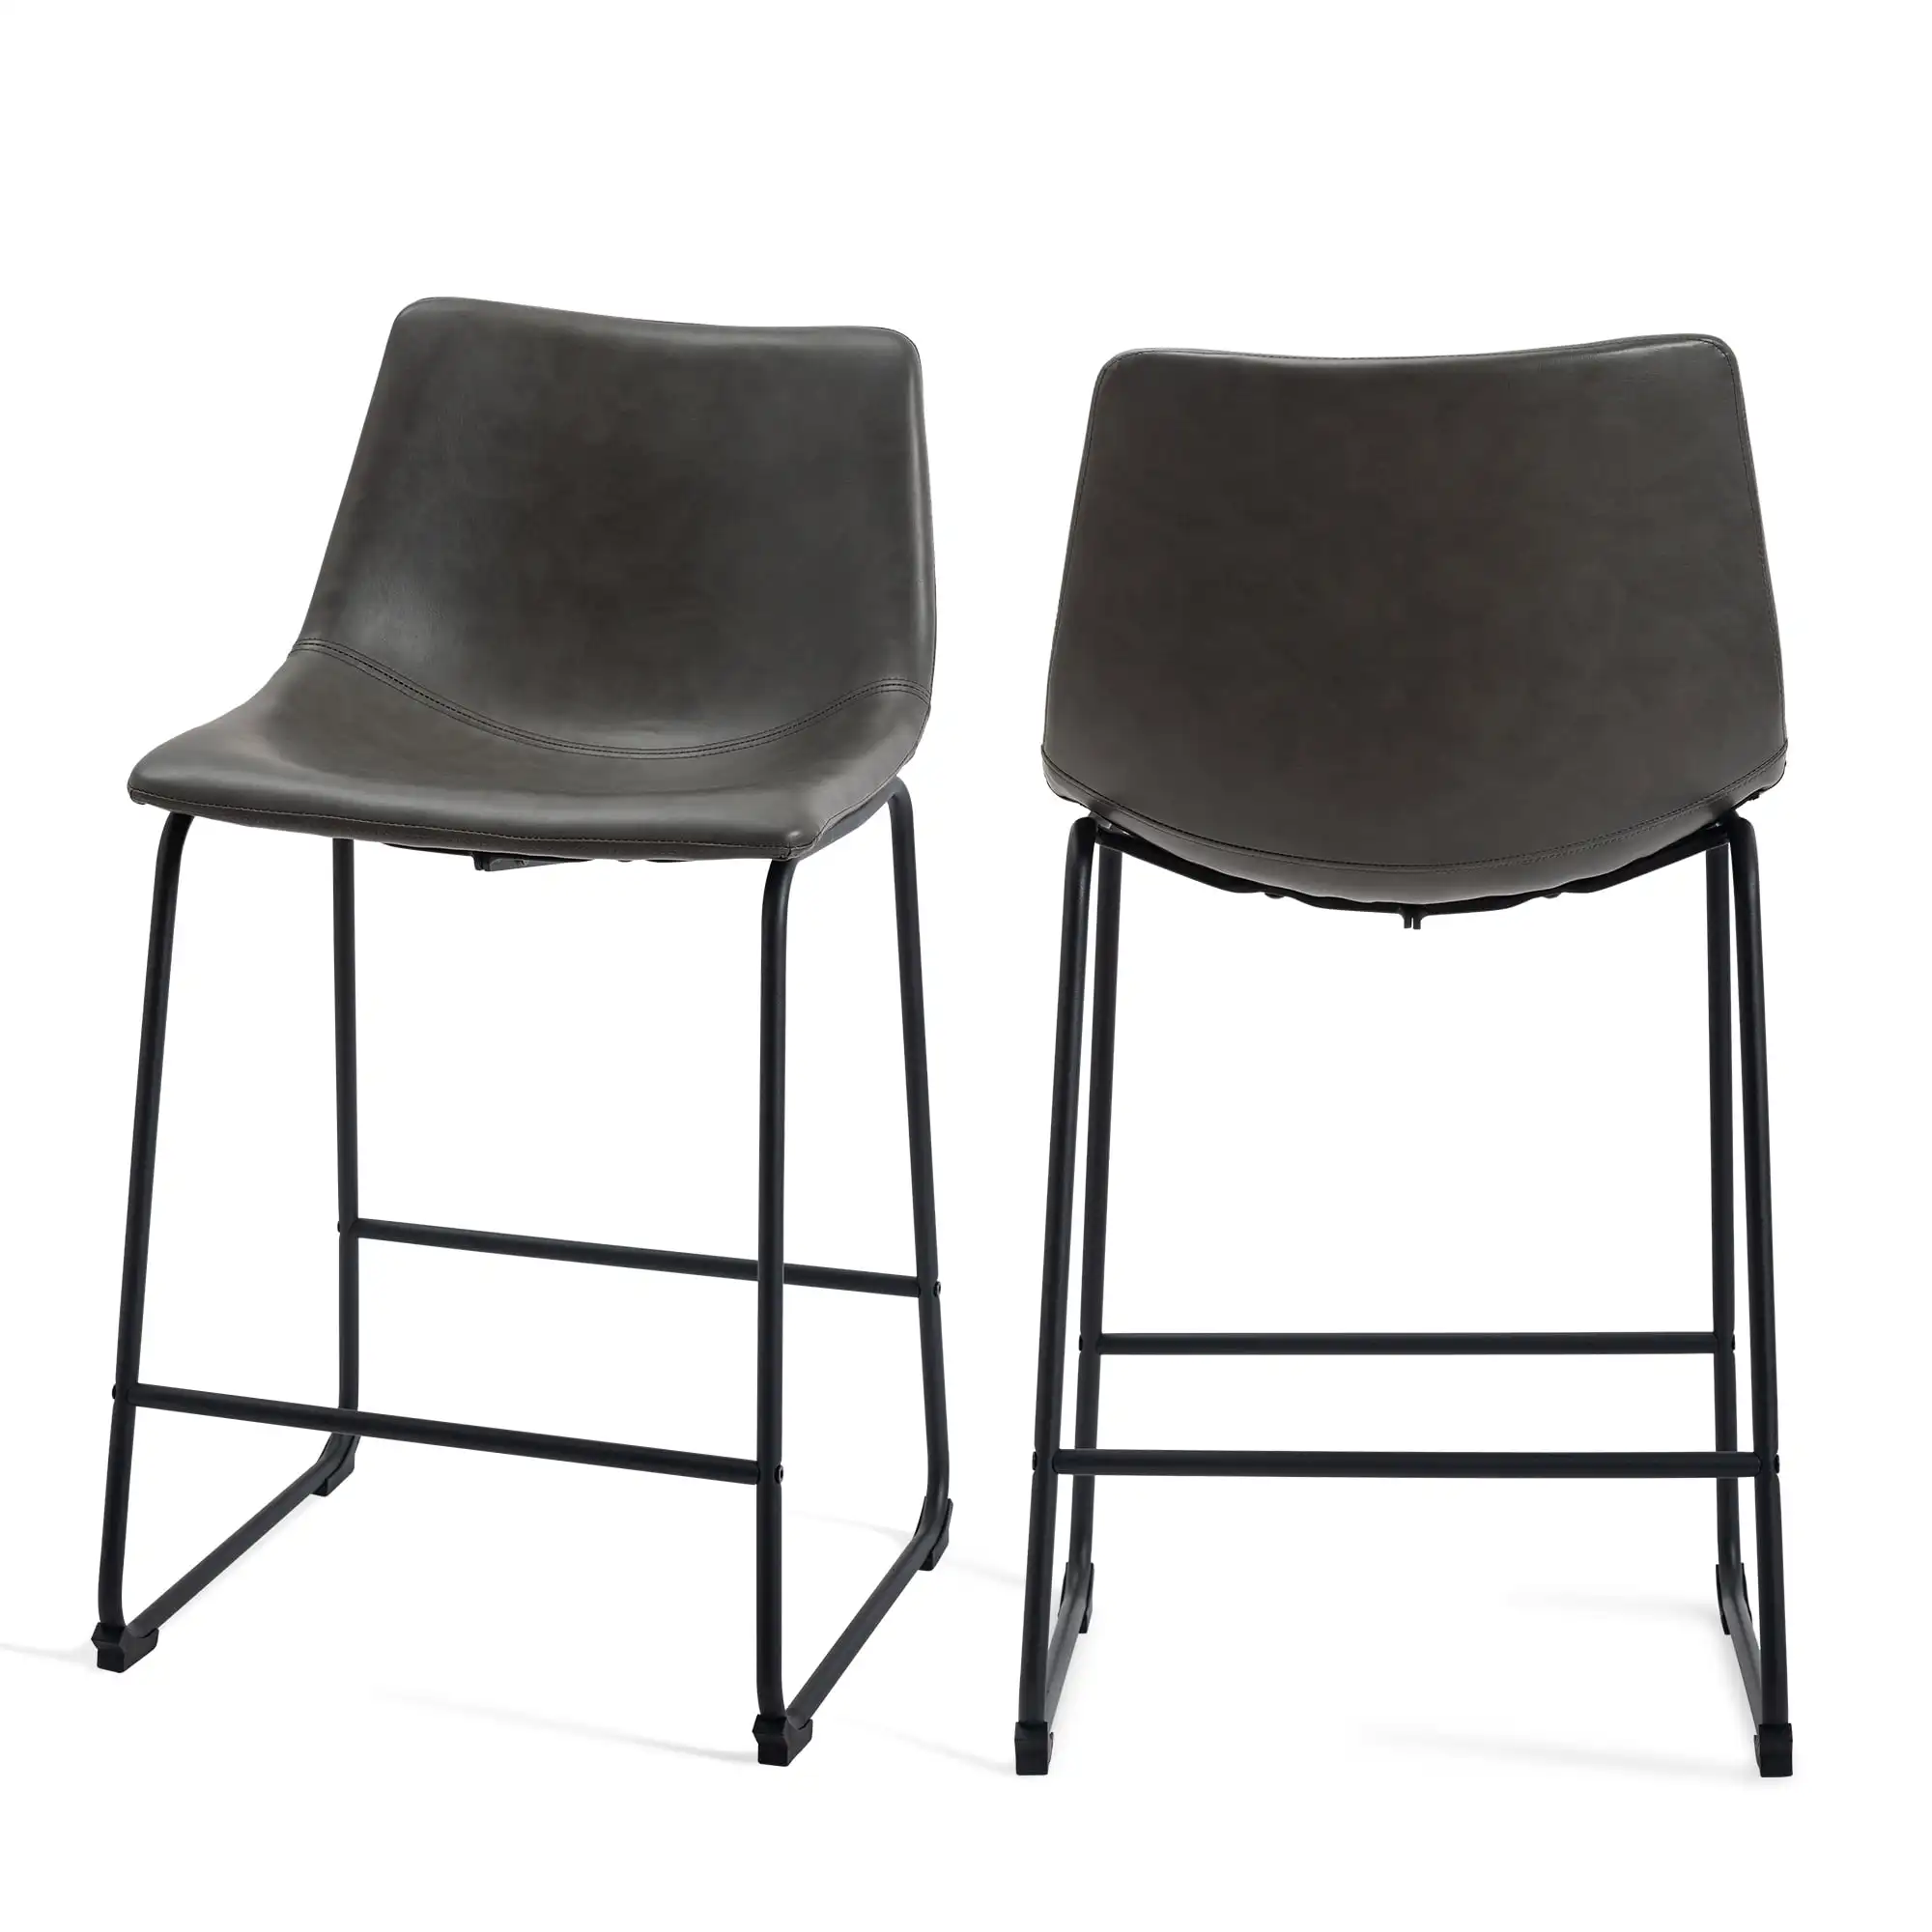 

24" Counter Height Bar Stools Kitchen PU Leather Barstool Grey Set of 2 Dining Chairs